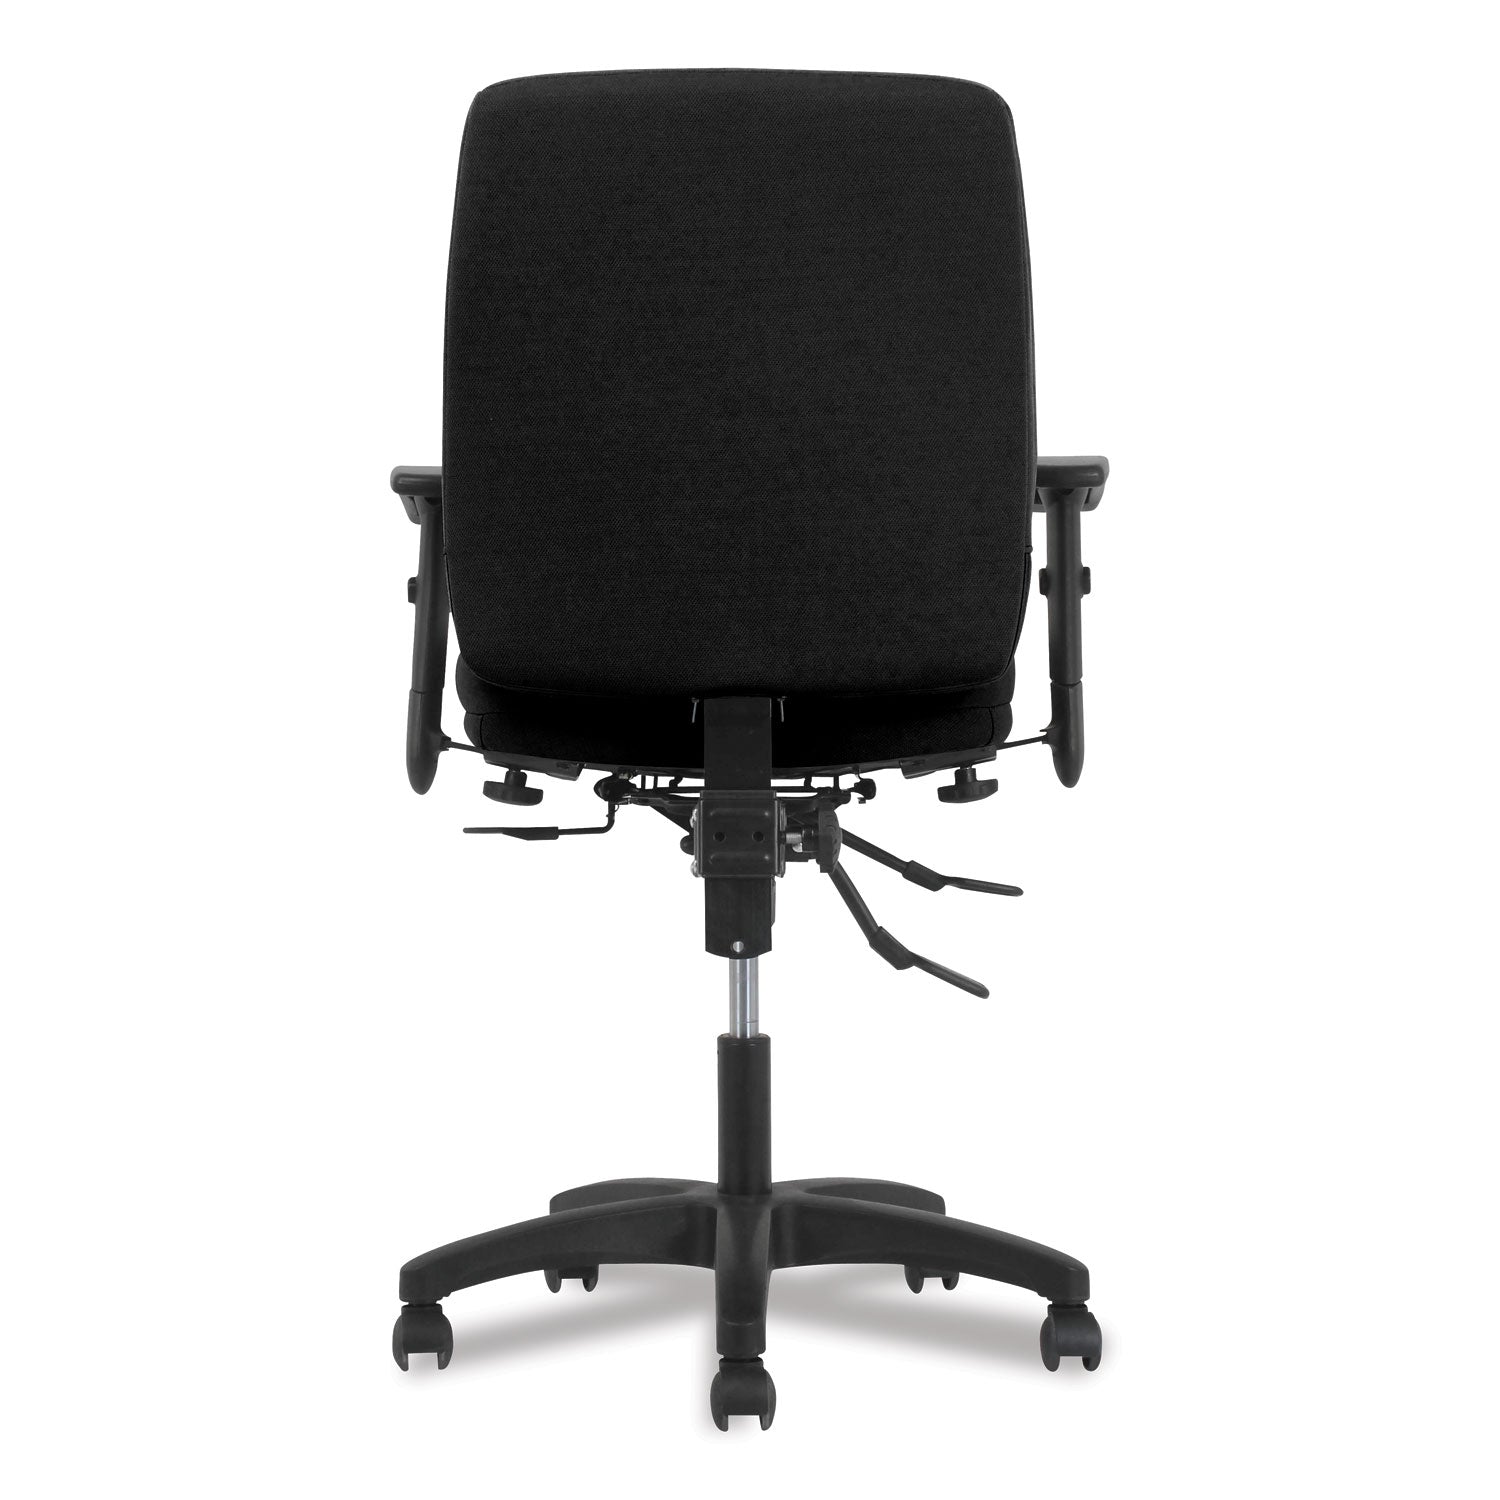 network-mid-back-task-chair-supports-up-to-250-lb-183-to-228-seat-height-black_honvl282a2va10t - 5